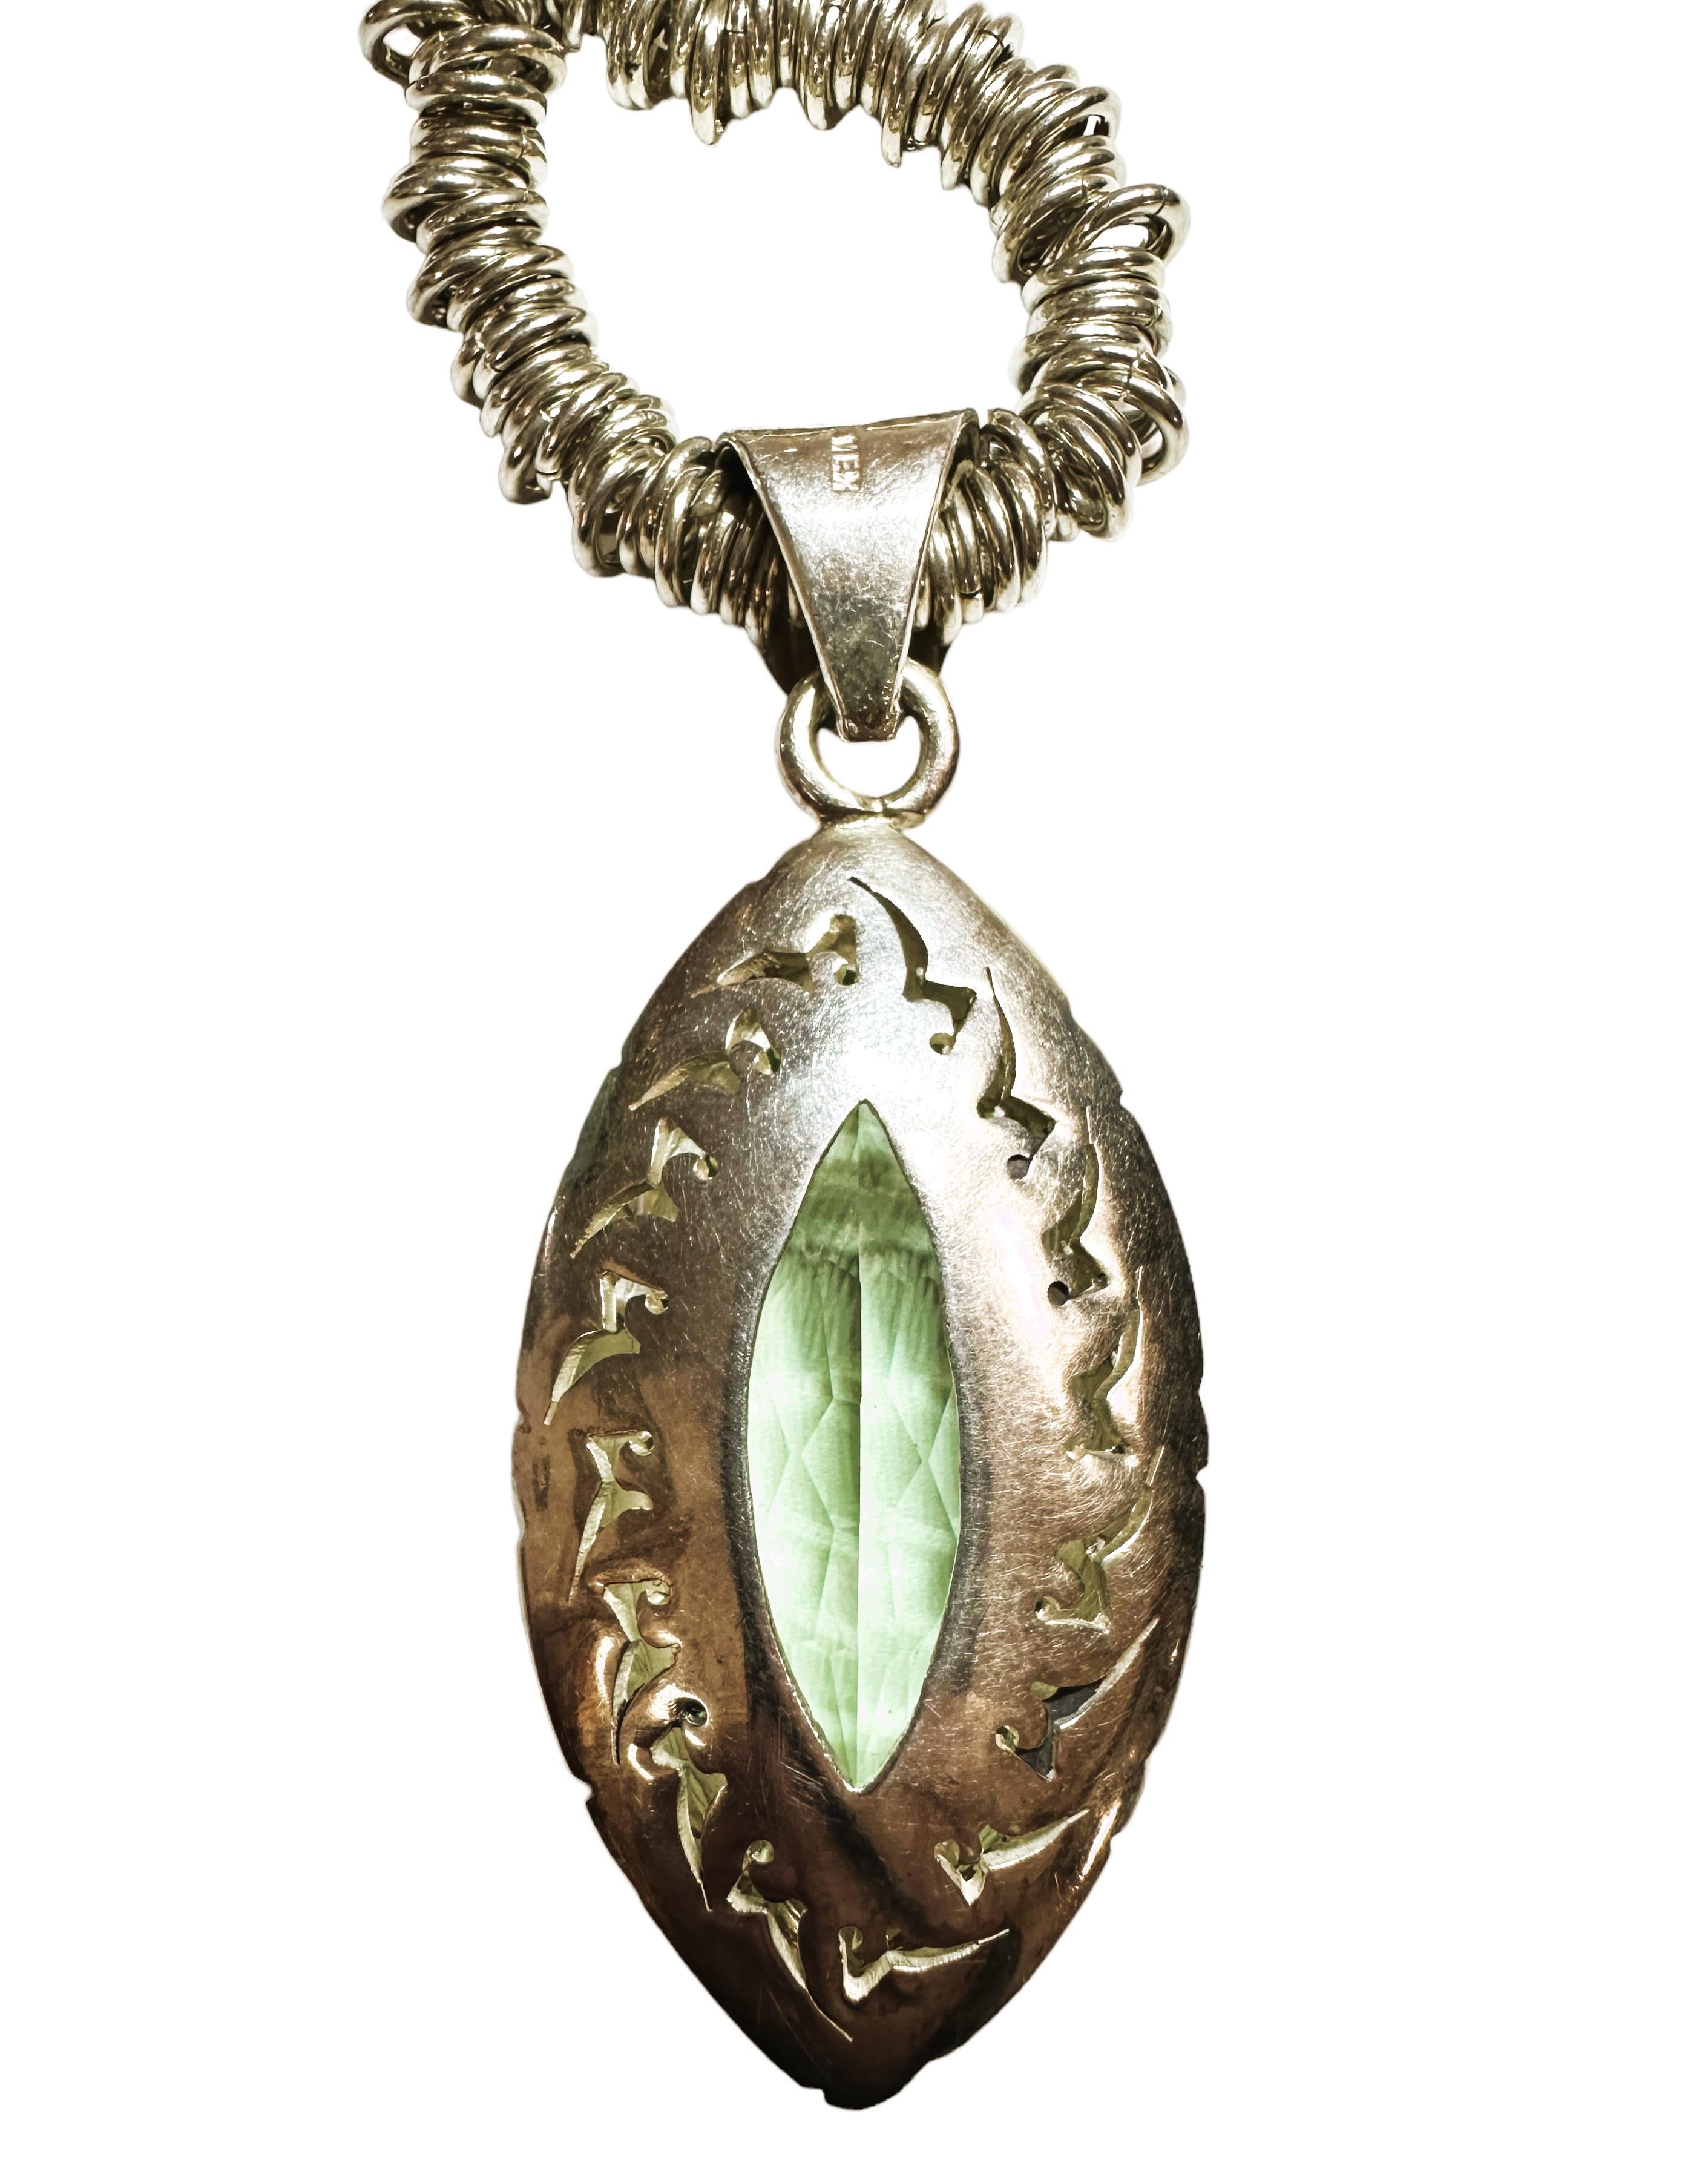 Handmade 16 Inch Ornate Sterling Silver Pendant Necklace with Green Quartz In Excellent Condition For Sale In Eagan, MN